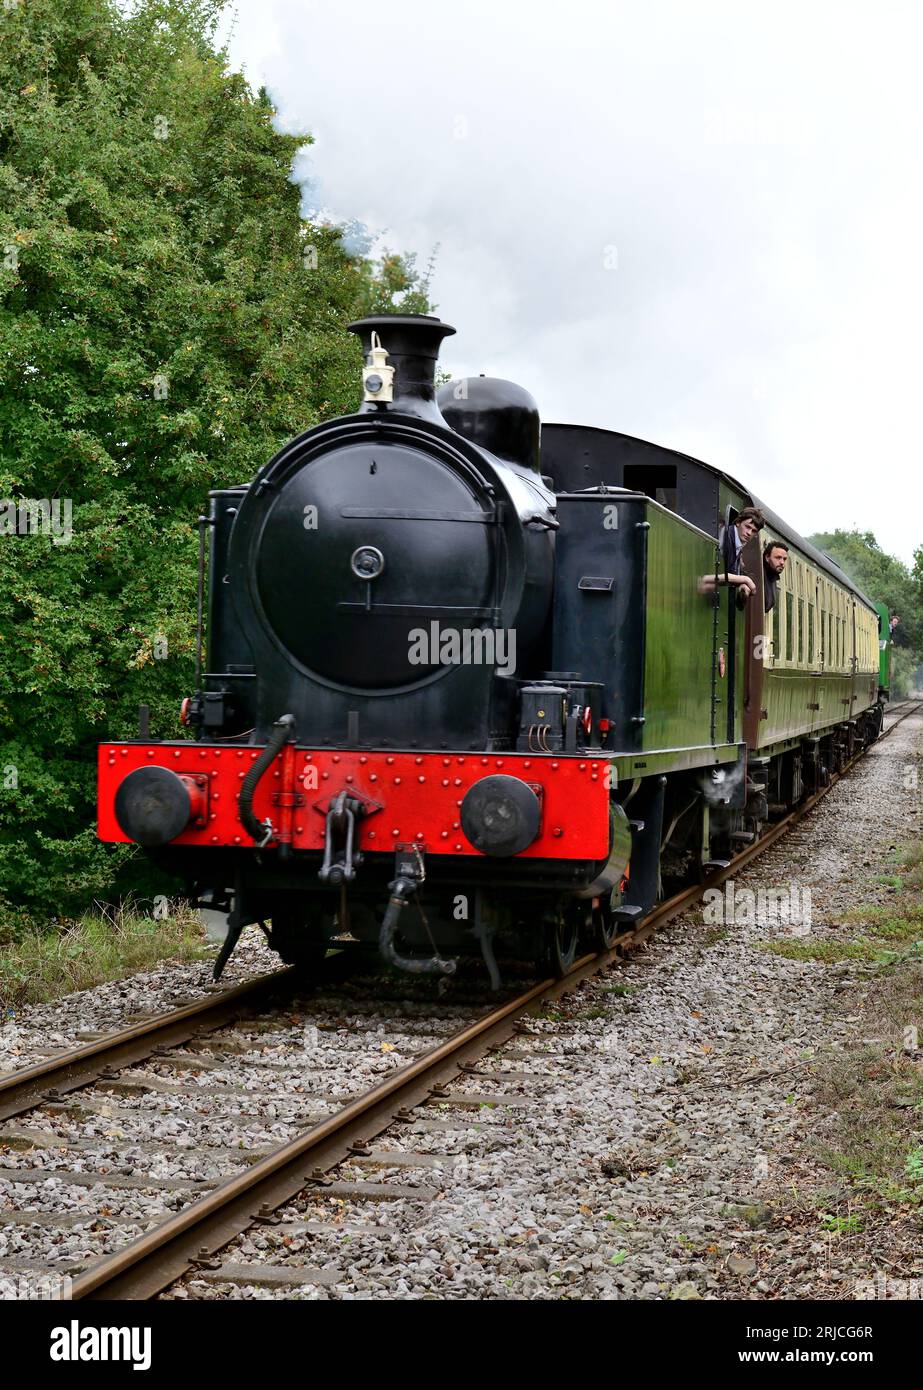 RSH No 7151 approaching Bitton station on the Avon Valley Railway, South Gloucestershire. Stock Photo